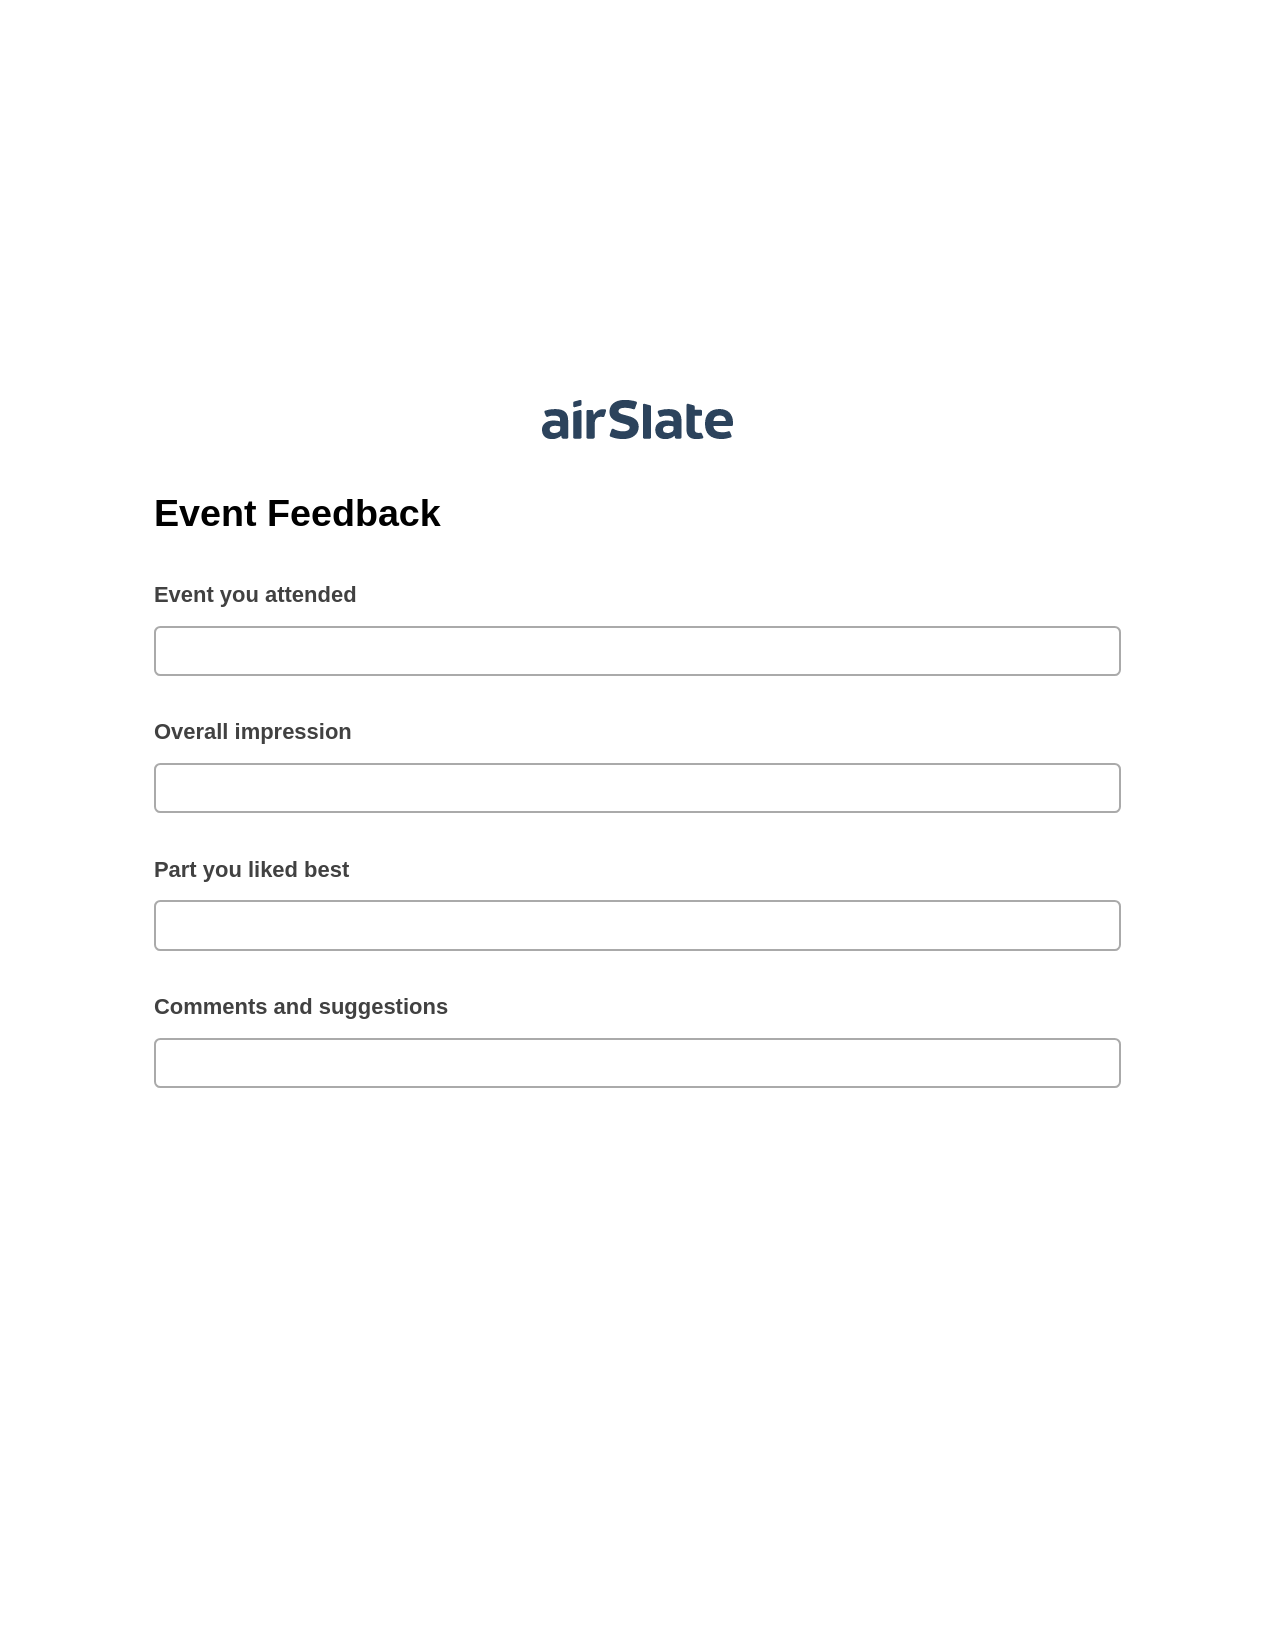 Event Feedback Pre-fill from Salesforce Record Bot, Audit Trail Bot, Archive to SharePoint Folder Bot